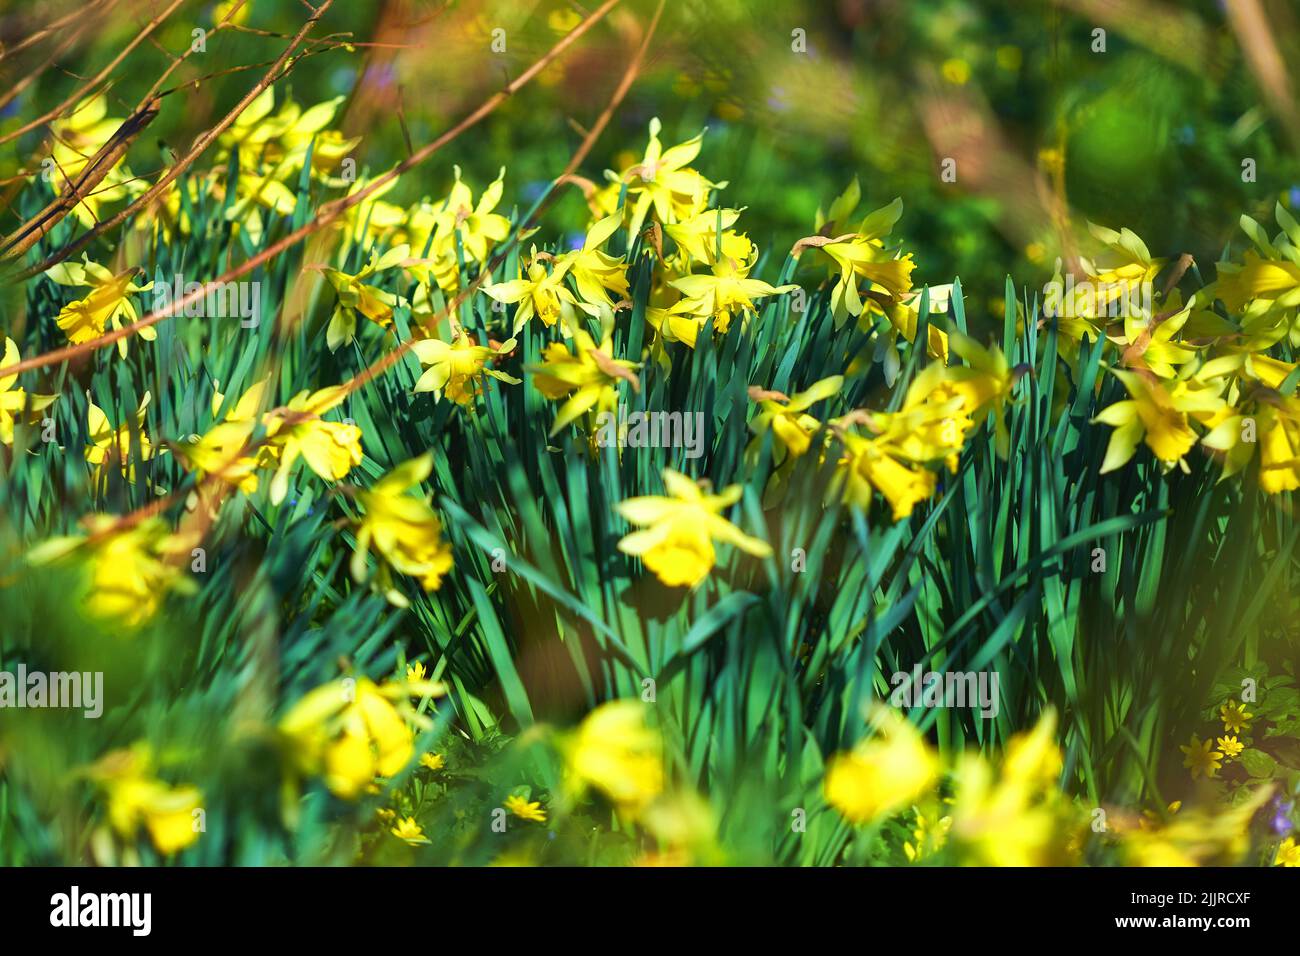 Beautiful, yellow and green flowers in garden blooming outside in nature during summer. Daffodil blossom in natural botanical environment. Gorgeous Stock Photo